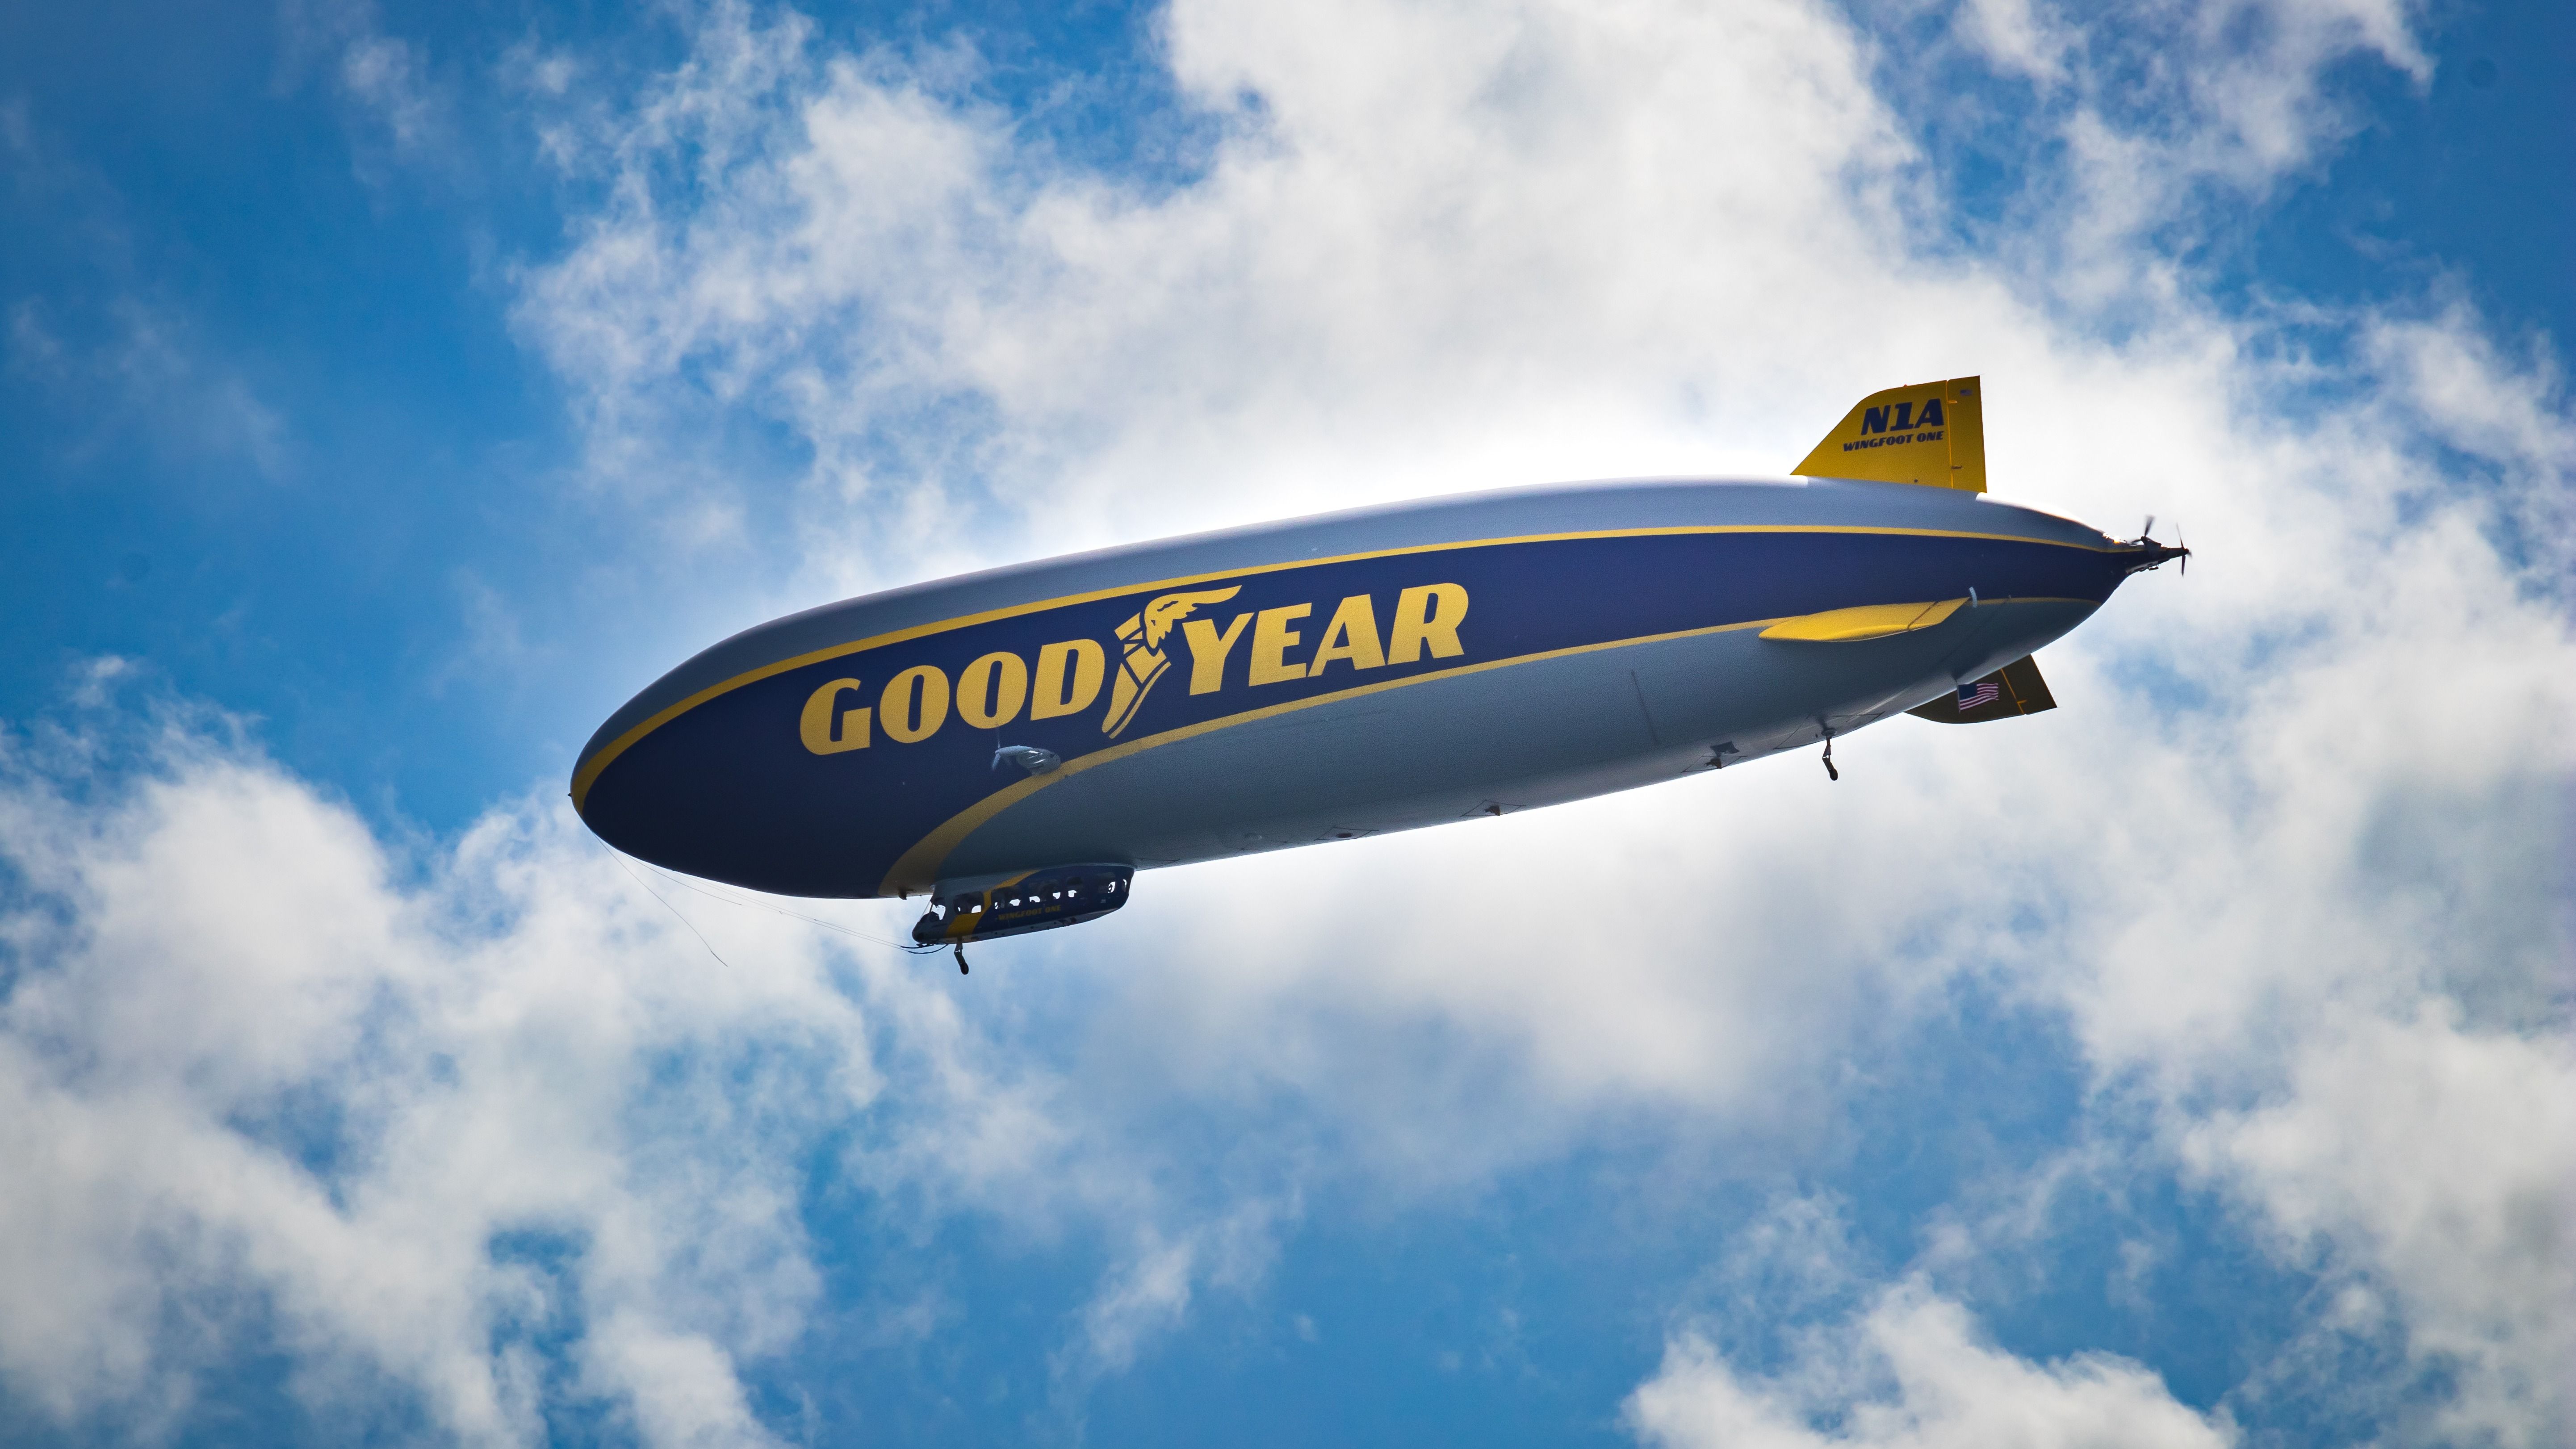 Zero-emissions hydrogen cargo airship prototype planned for 2025